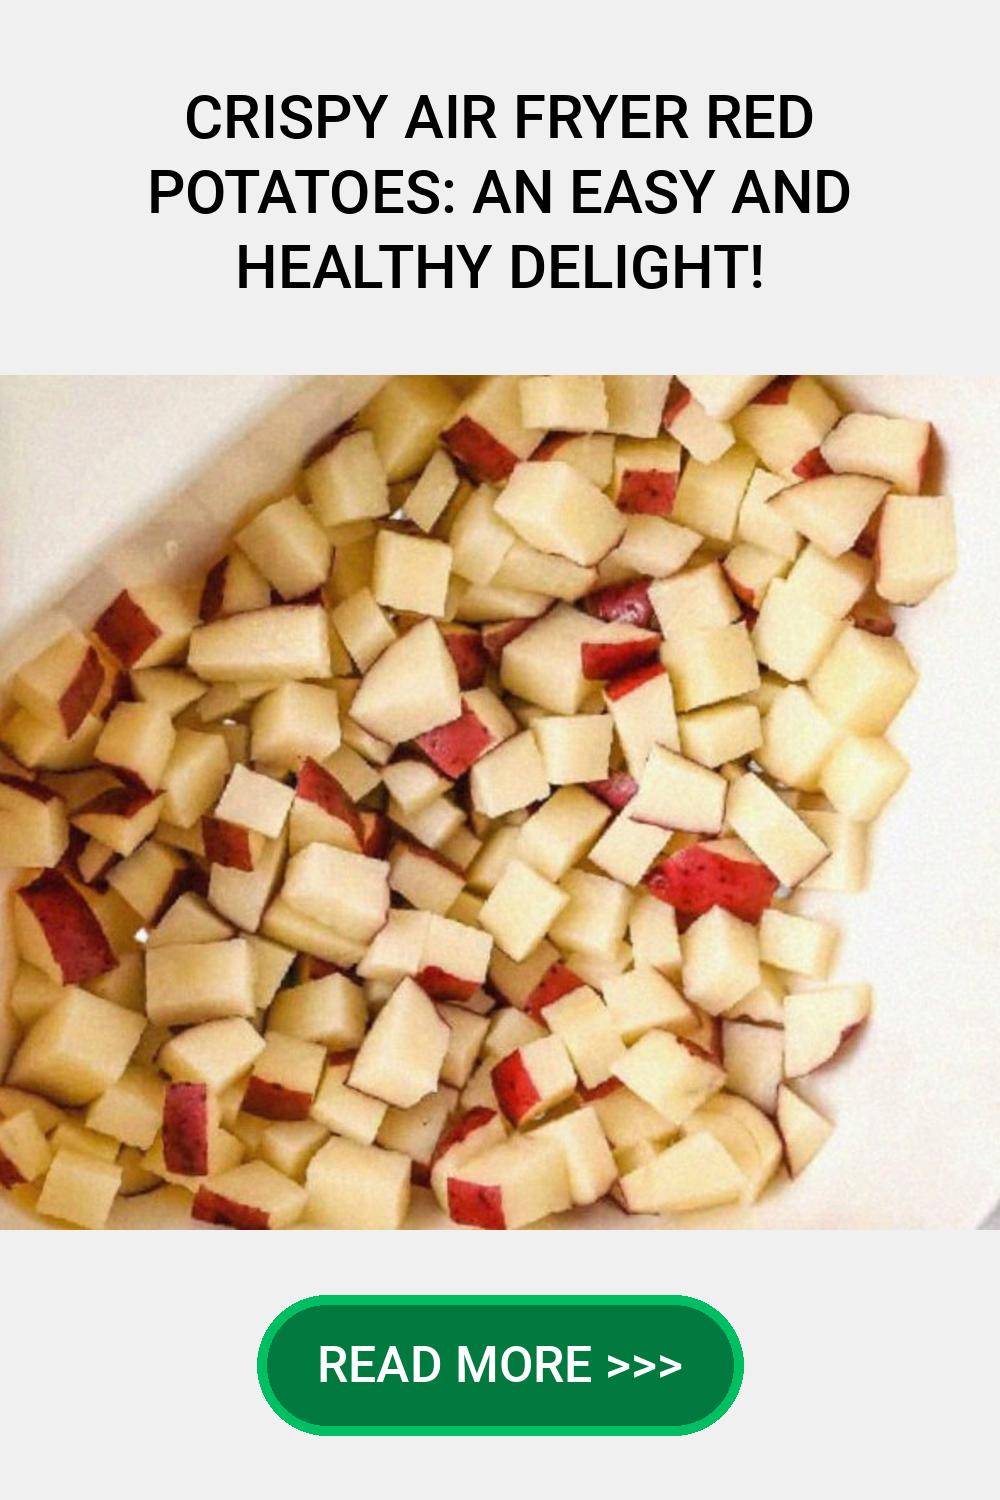 #EasyRecipes #HealthySides #Whole30Approved